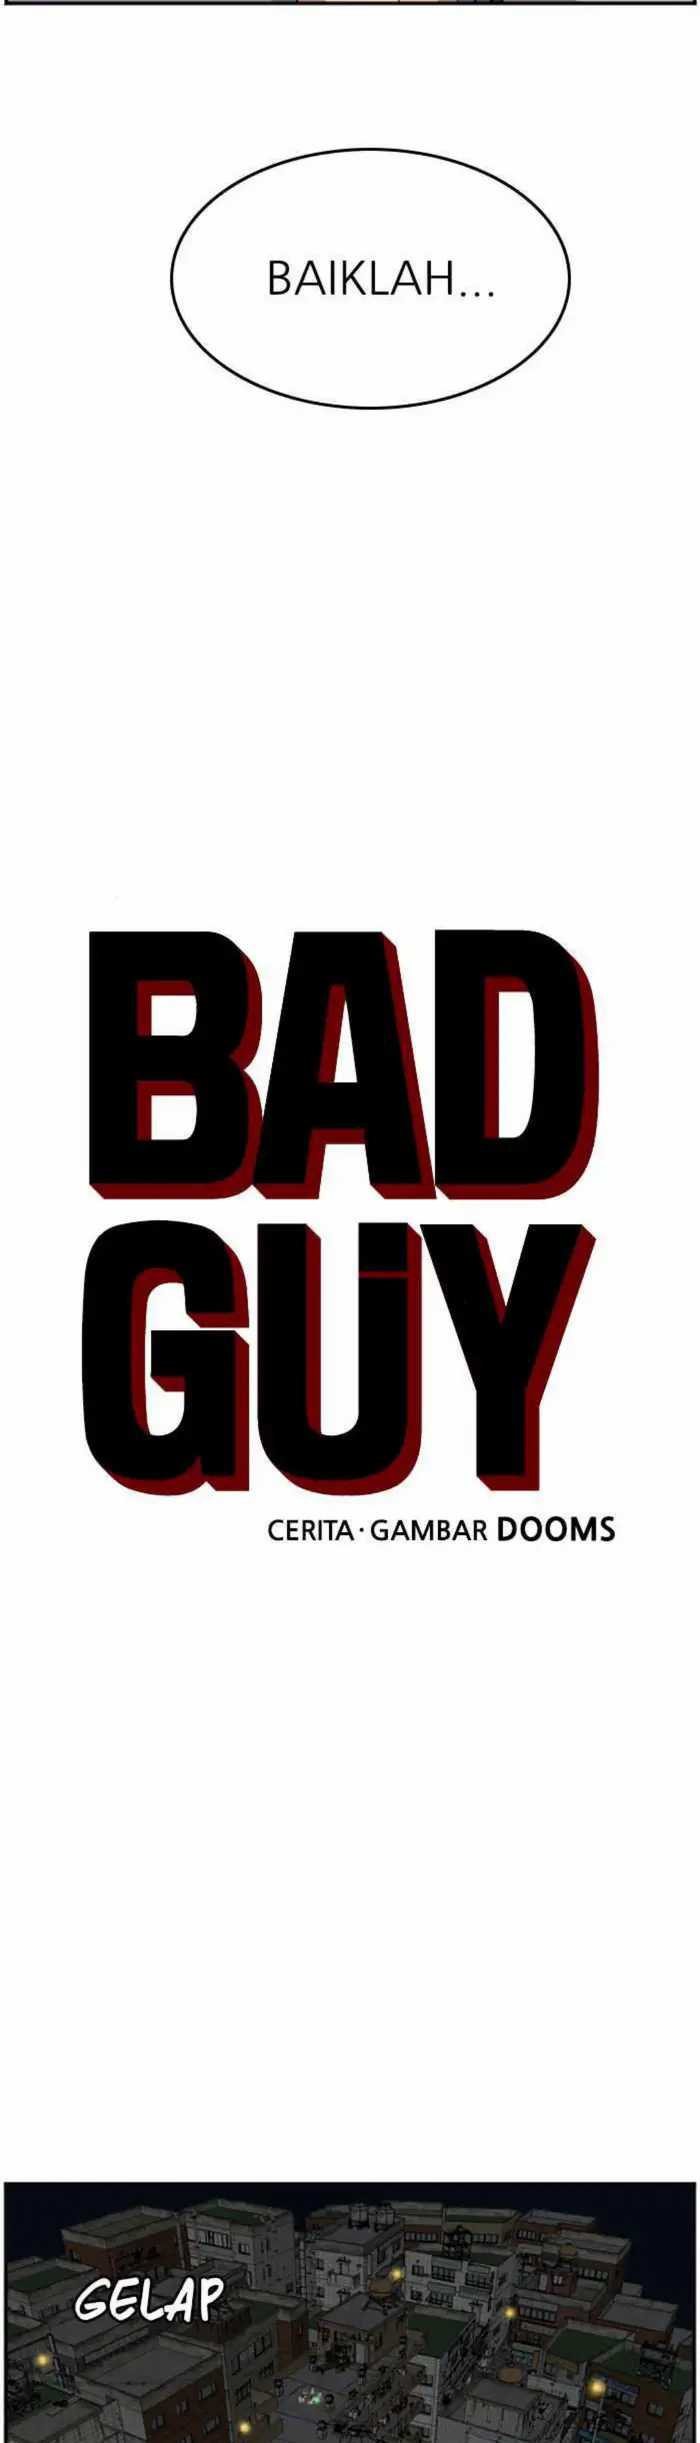 A Bad Person Chapter 104